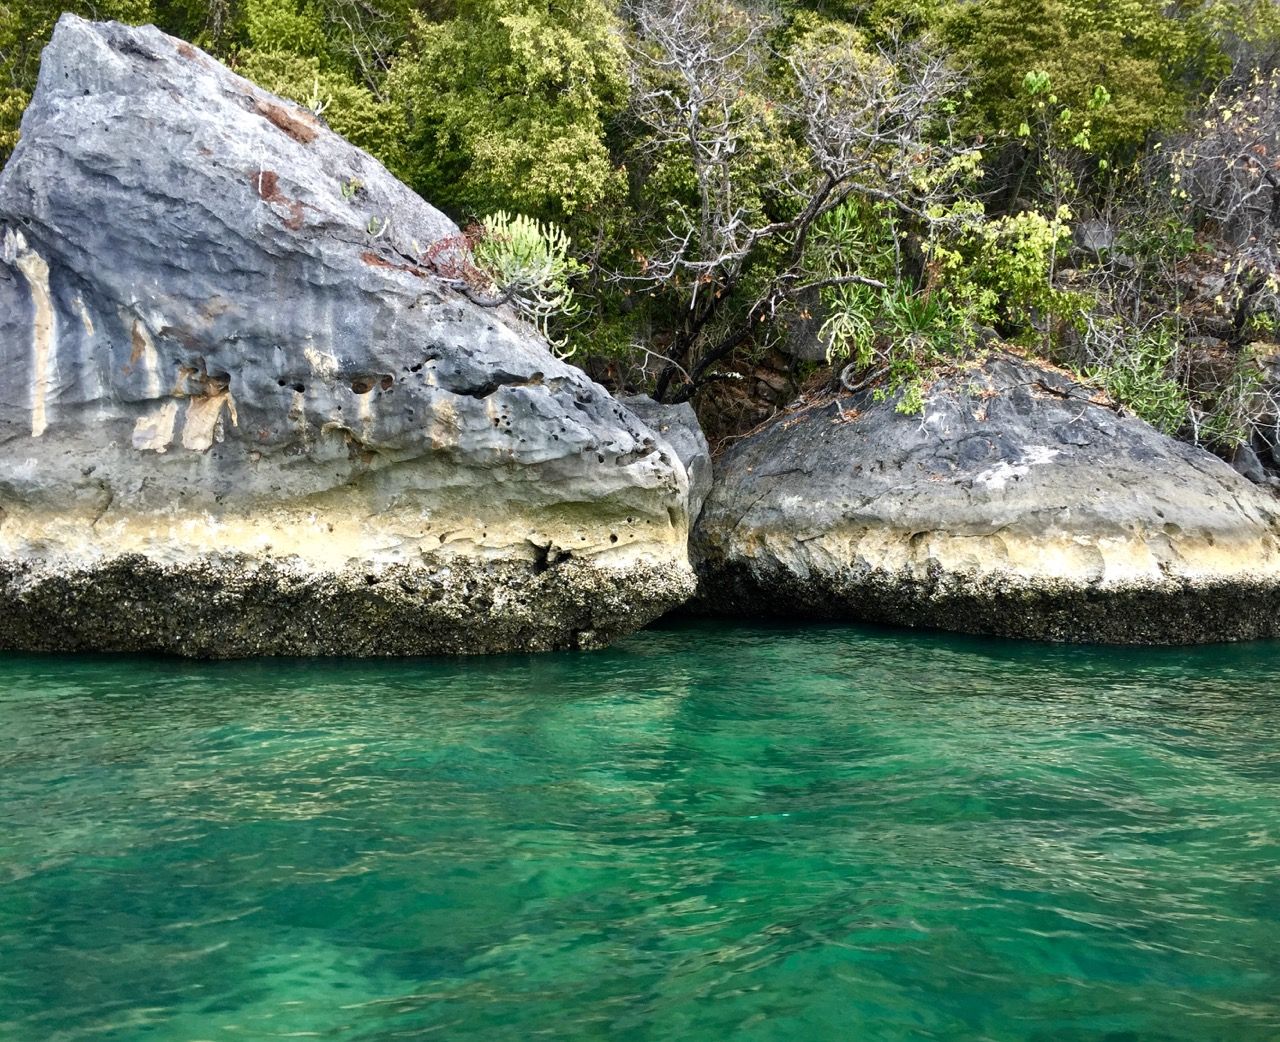 Rocks with water marks and dead coral.